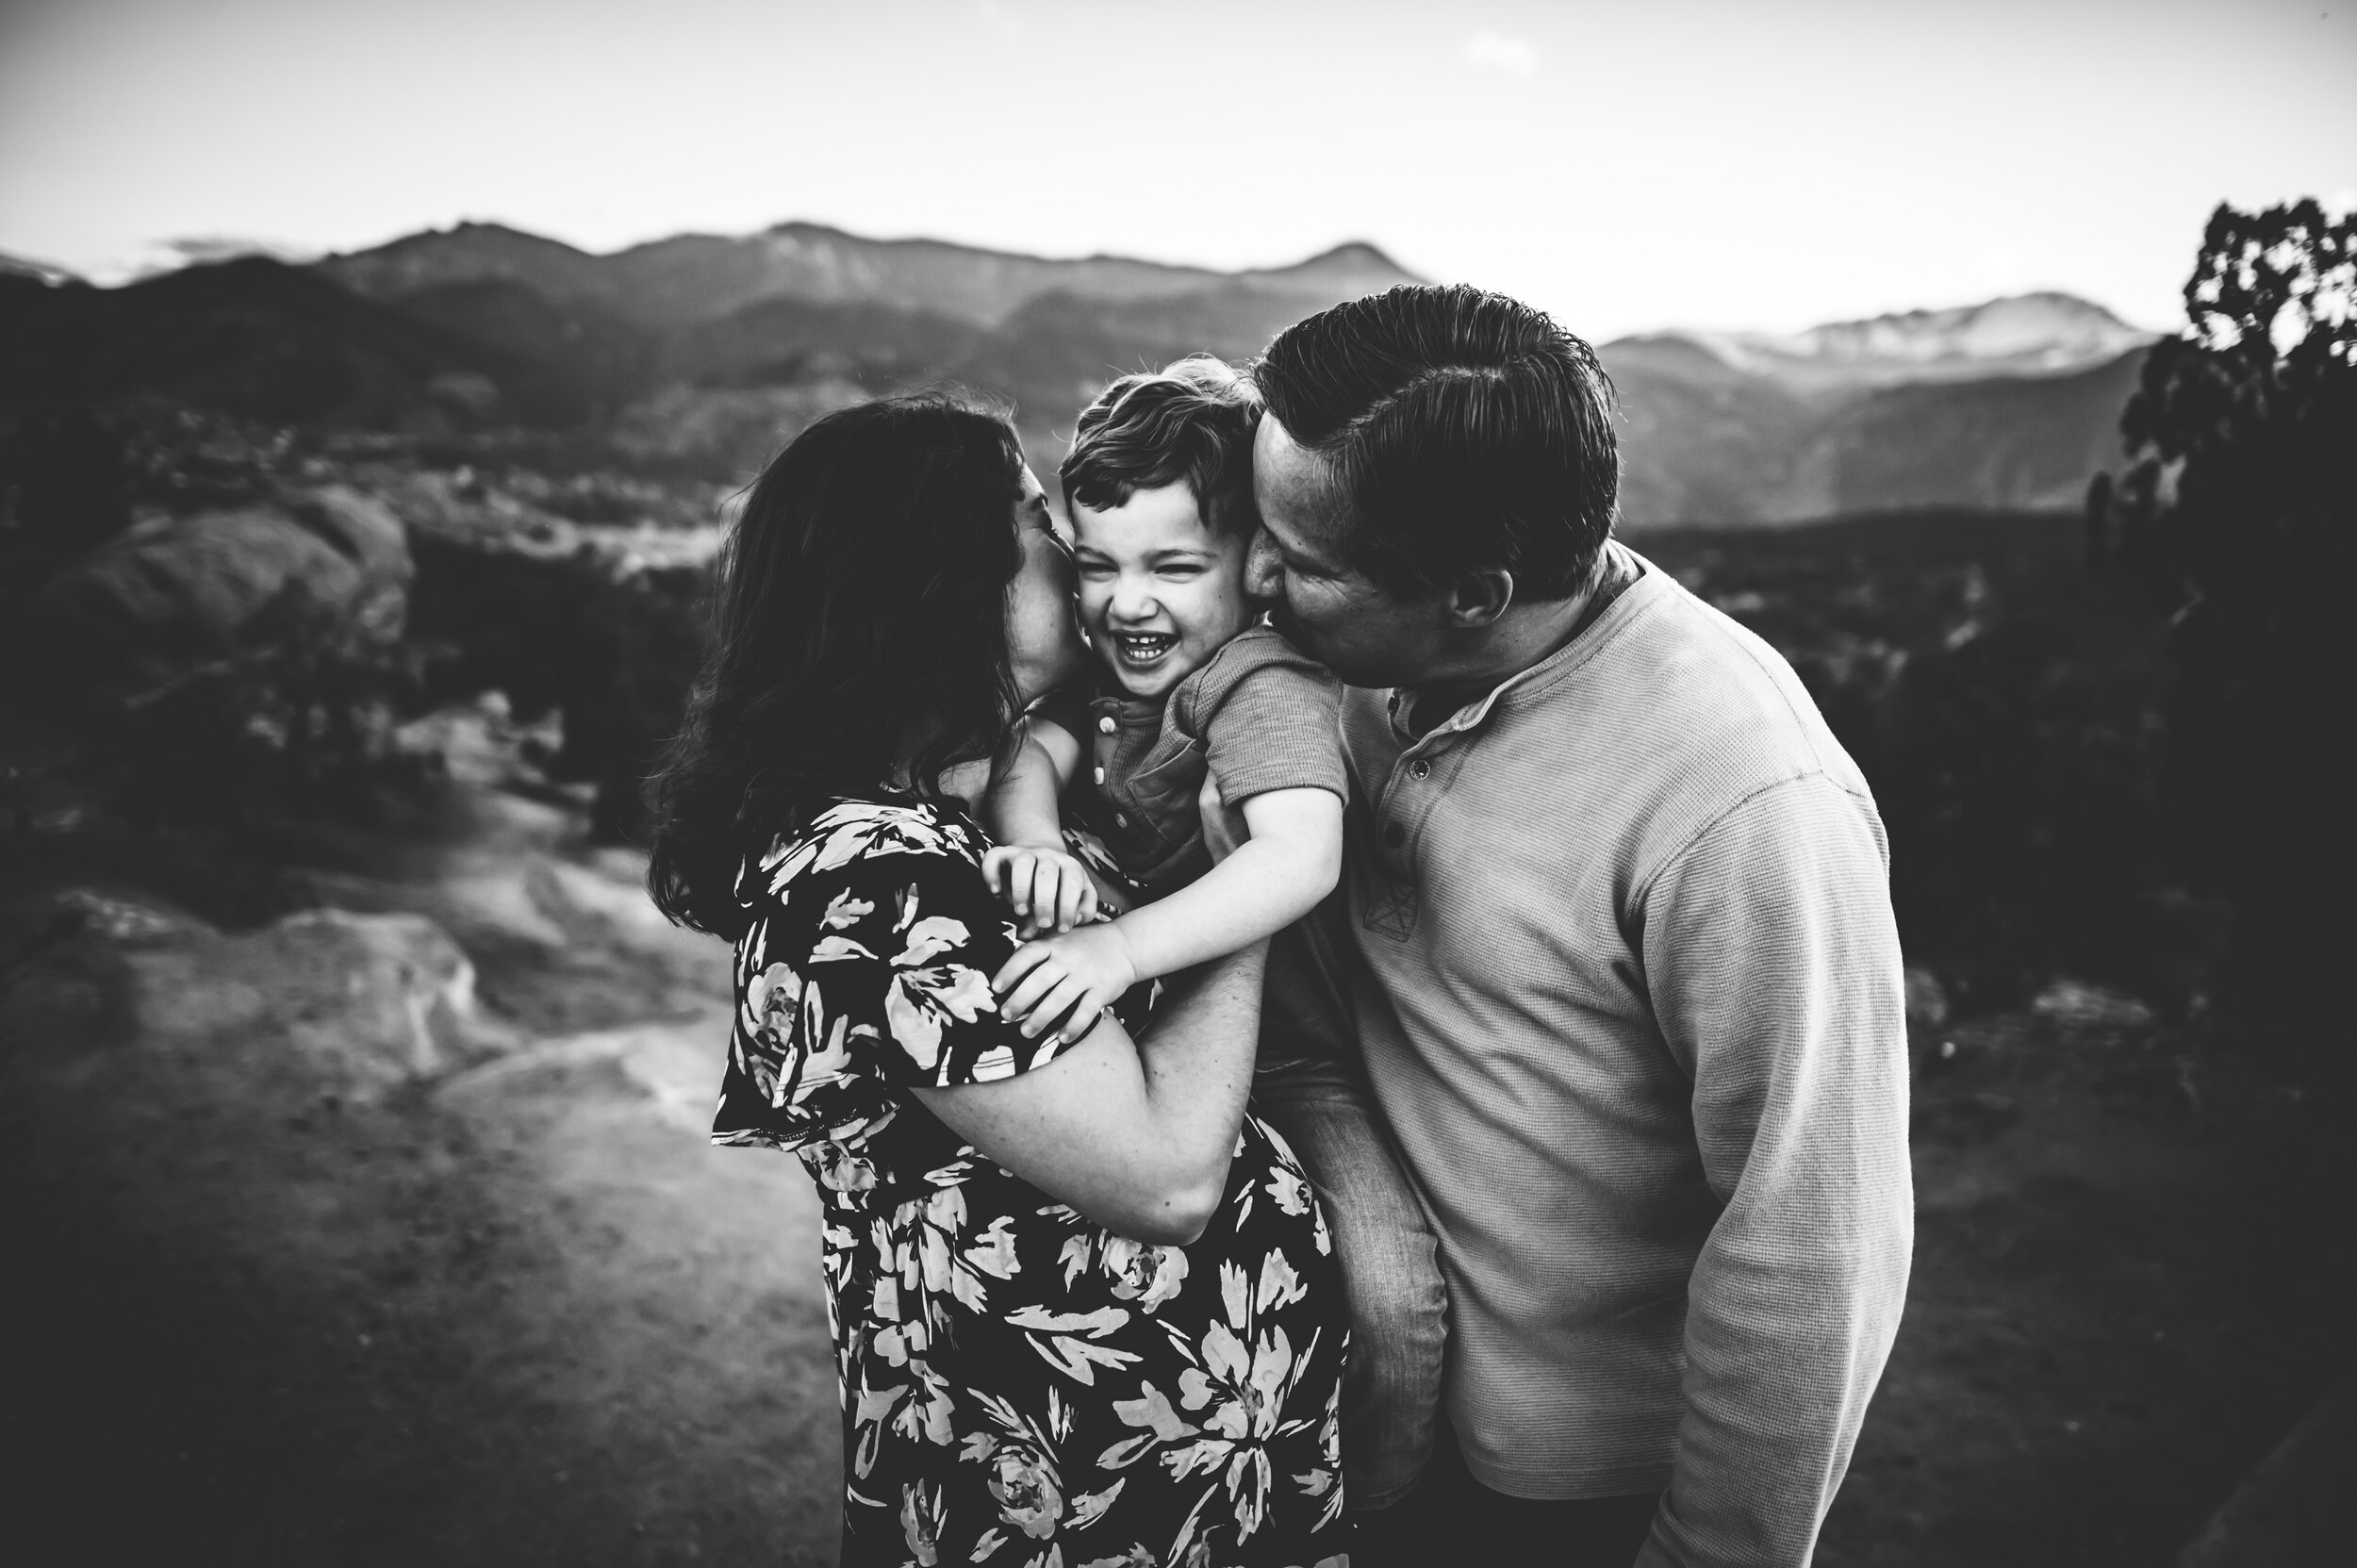 Andrea Grimm Maternity Family Session Colorado Springs Sunset Garden of the Gods Wild Prairie Photography-32-2020.jpg